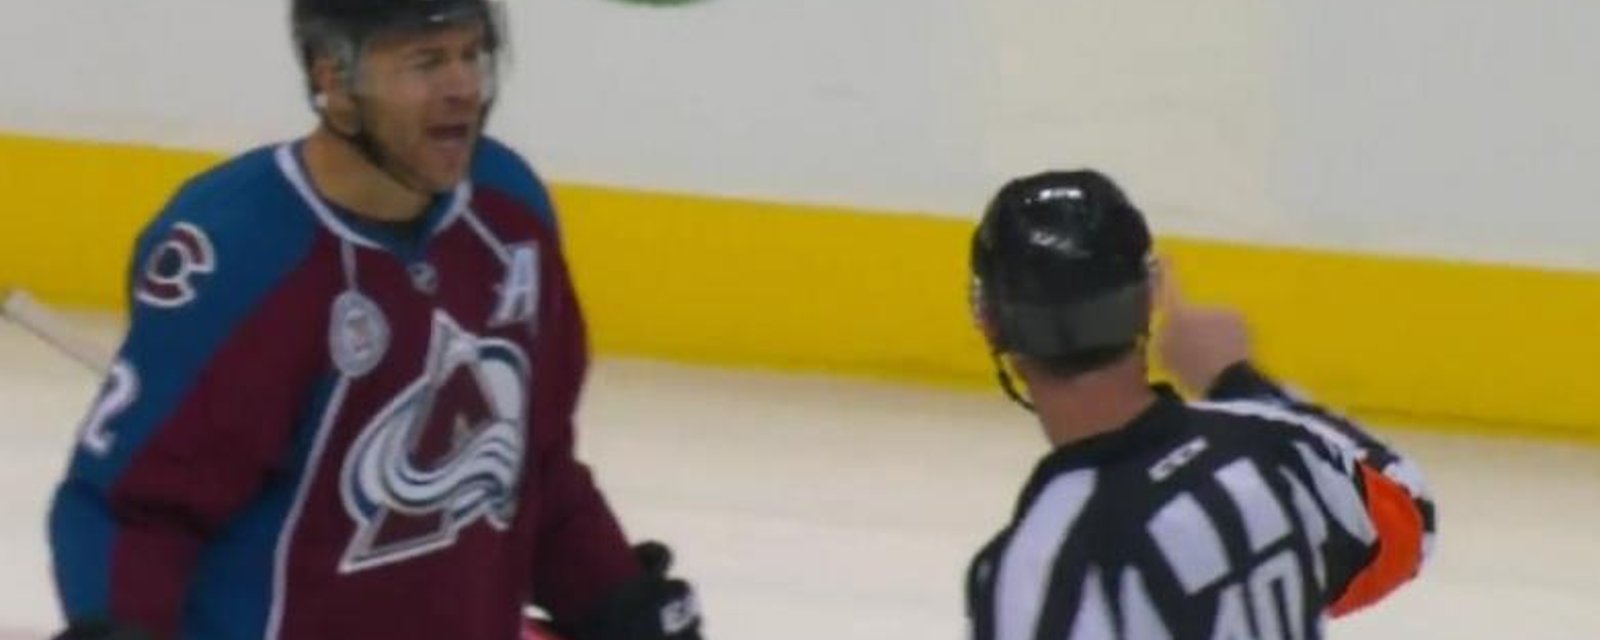 Jerome Iginla denied a goal, was it interference or acting?